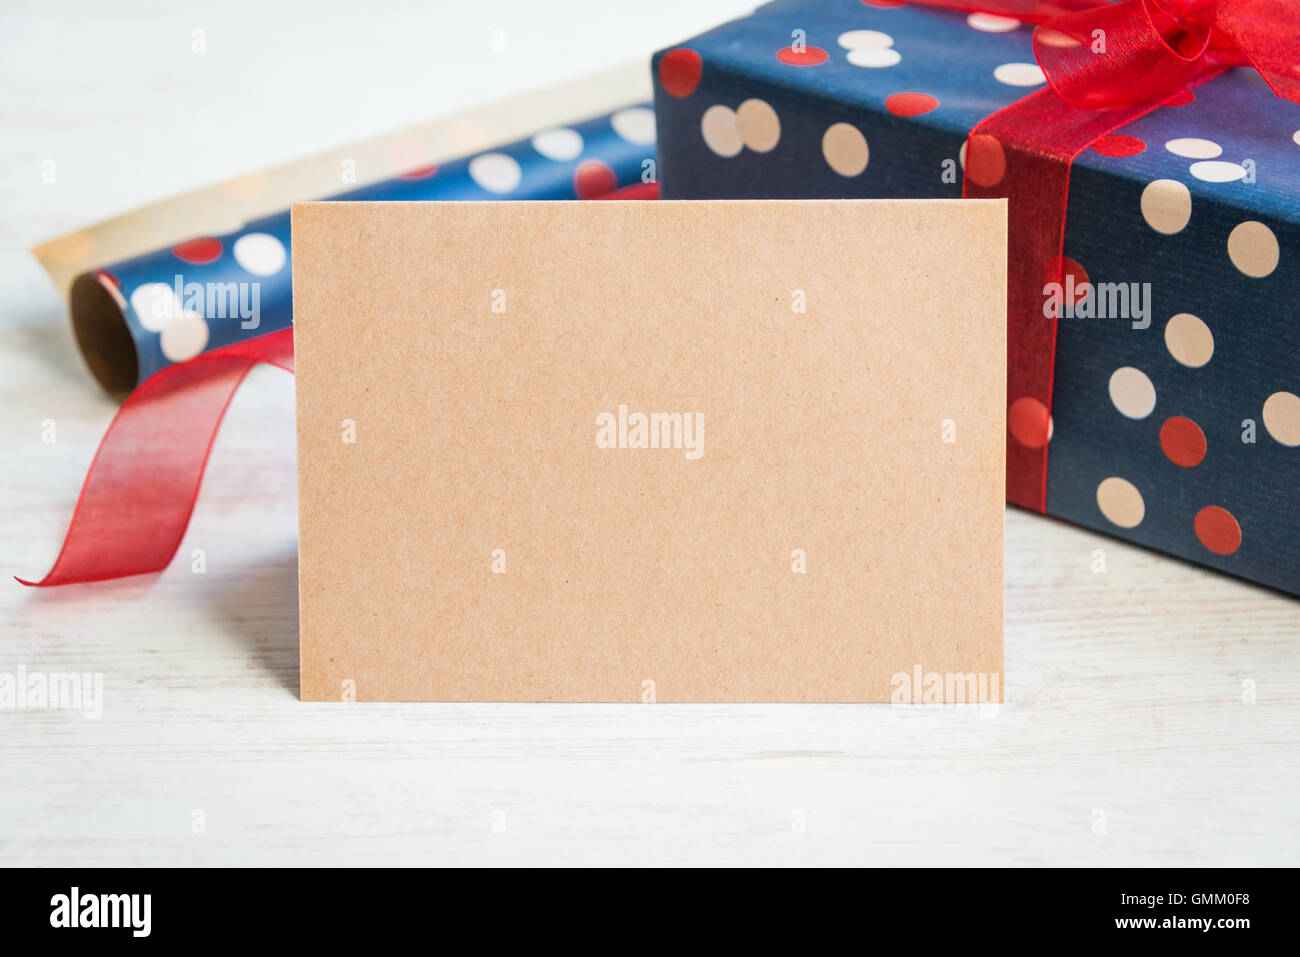 Empty greeting kraft card. Wrapped gift and wrapping materials over a white wood background. Stock Photo